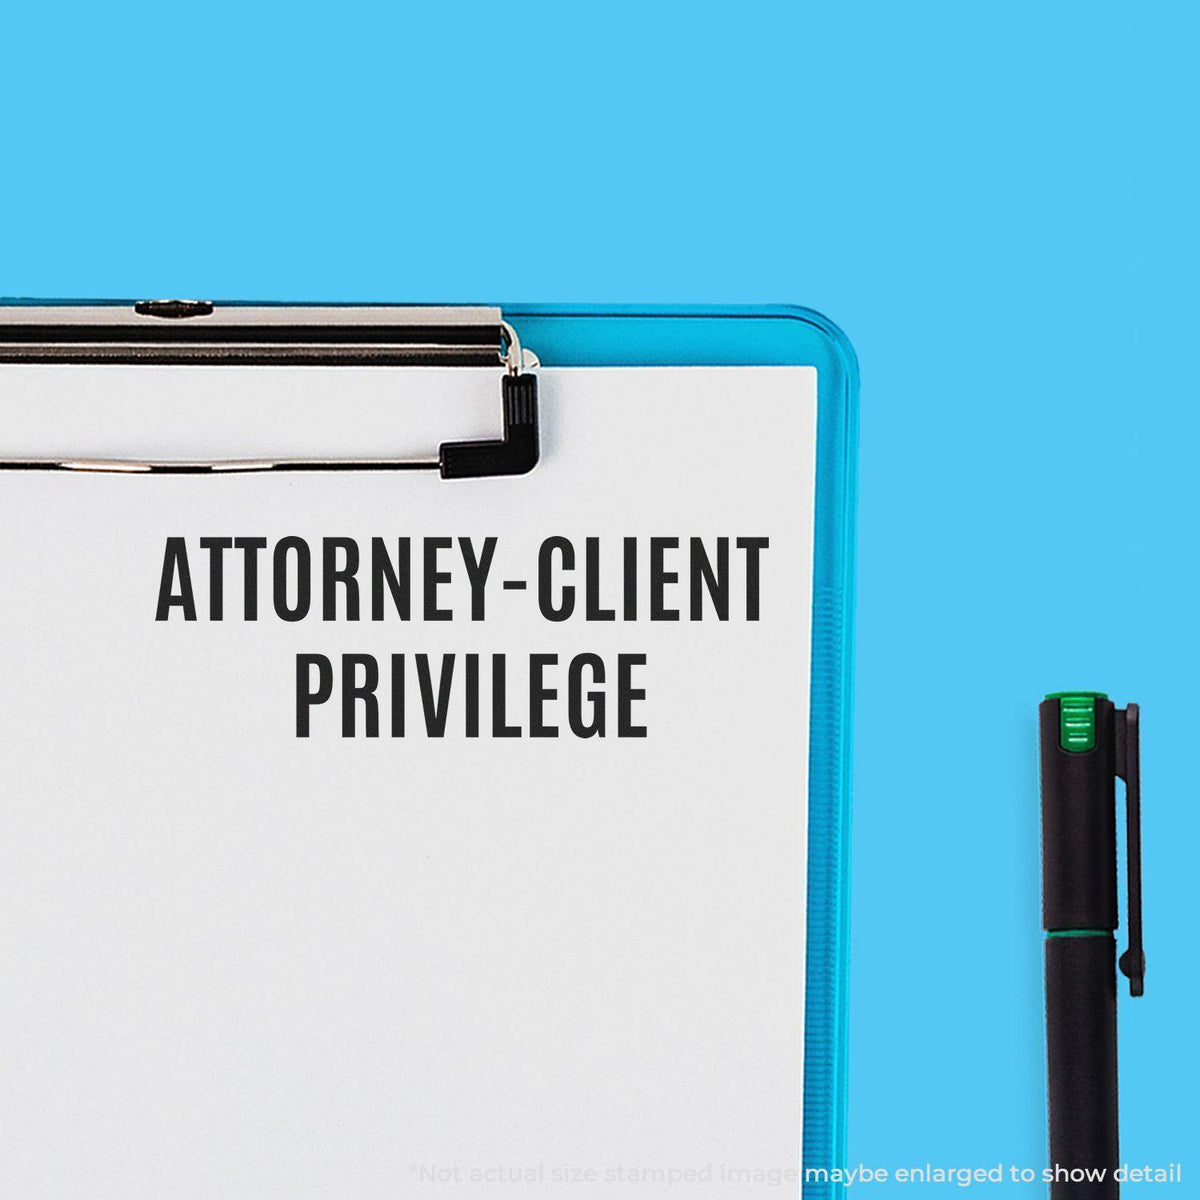 In Use Large Self-Inking Attorney-Client Privilege Stamp Image